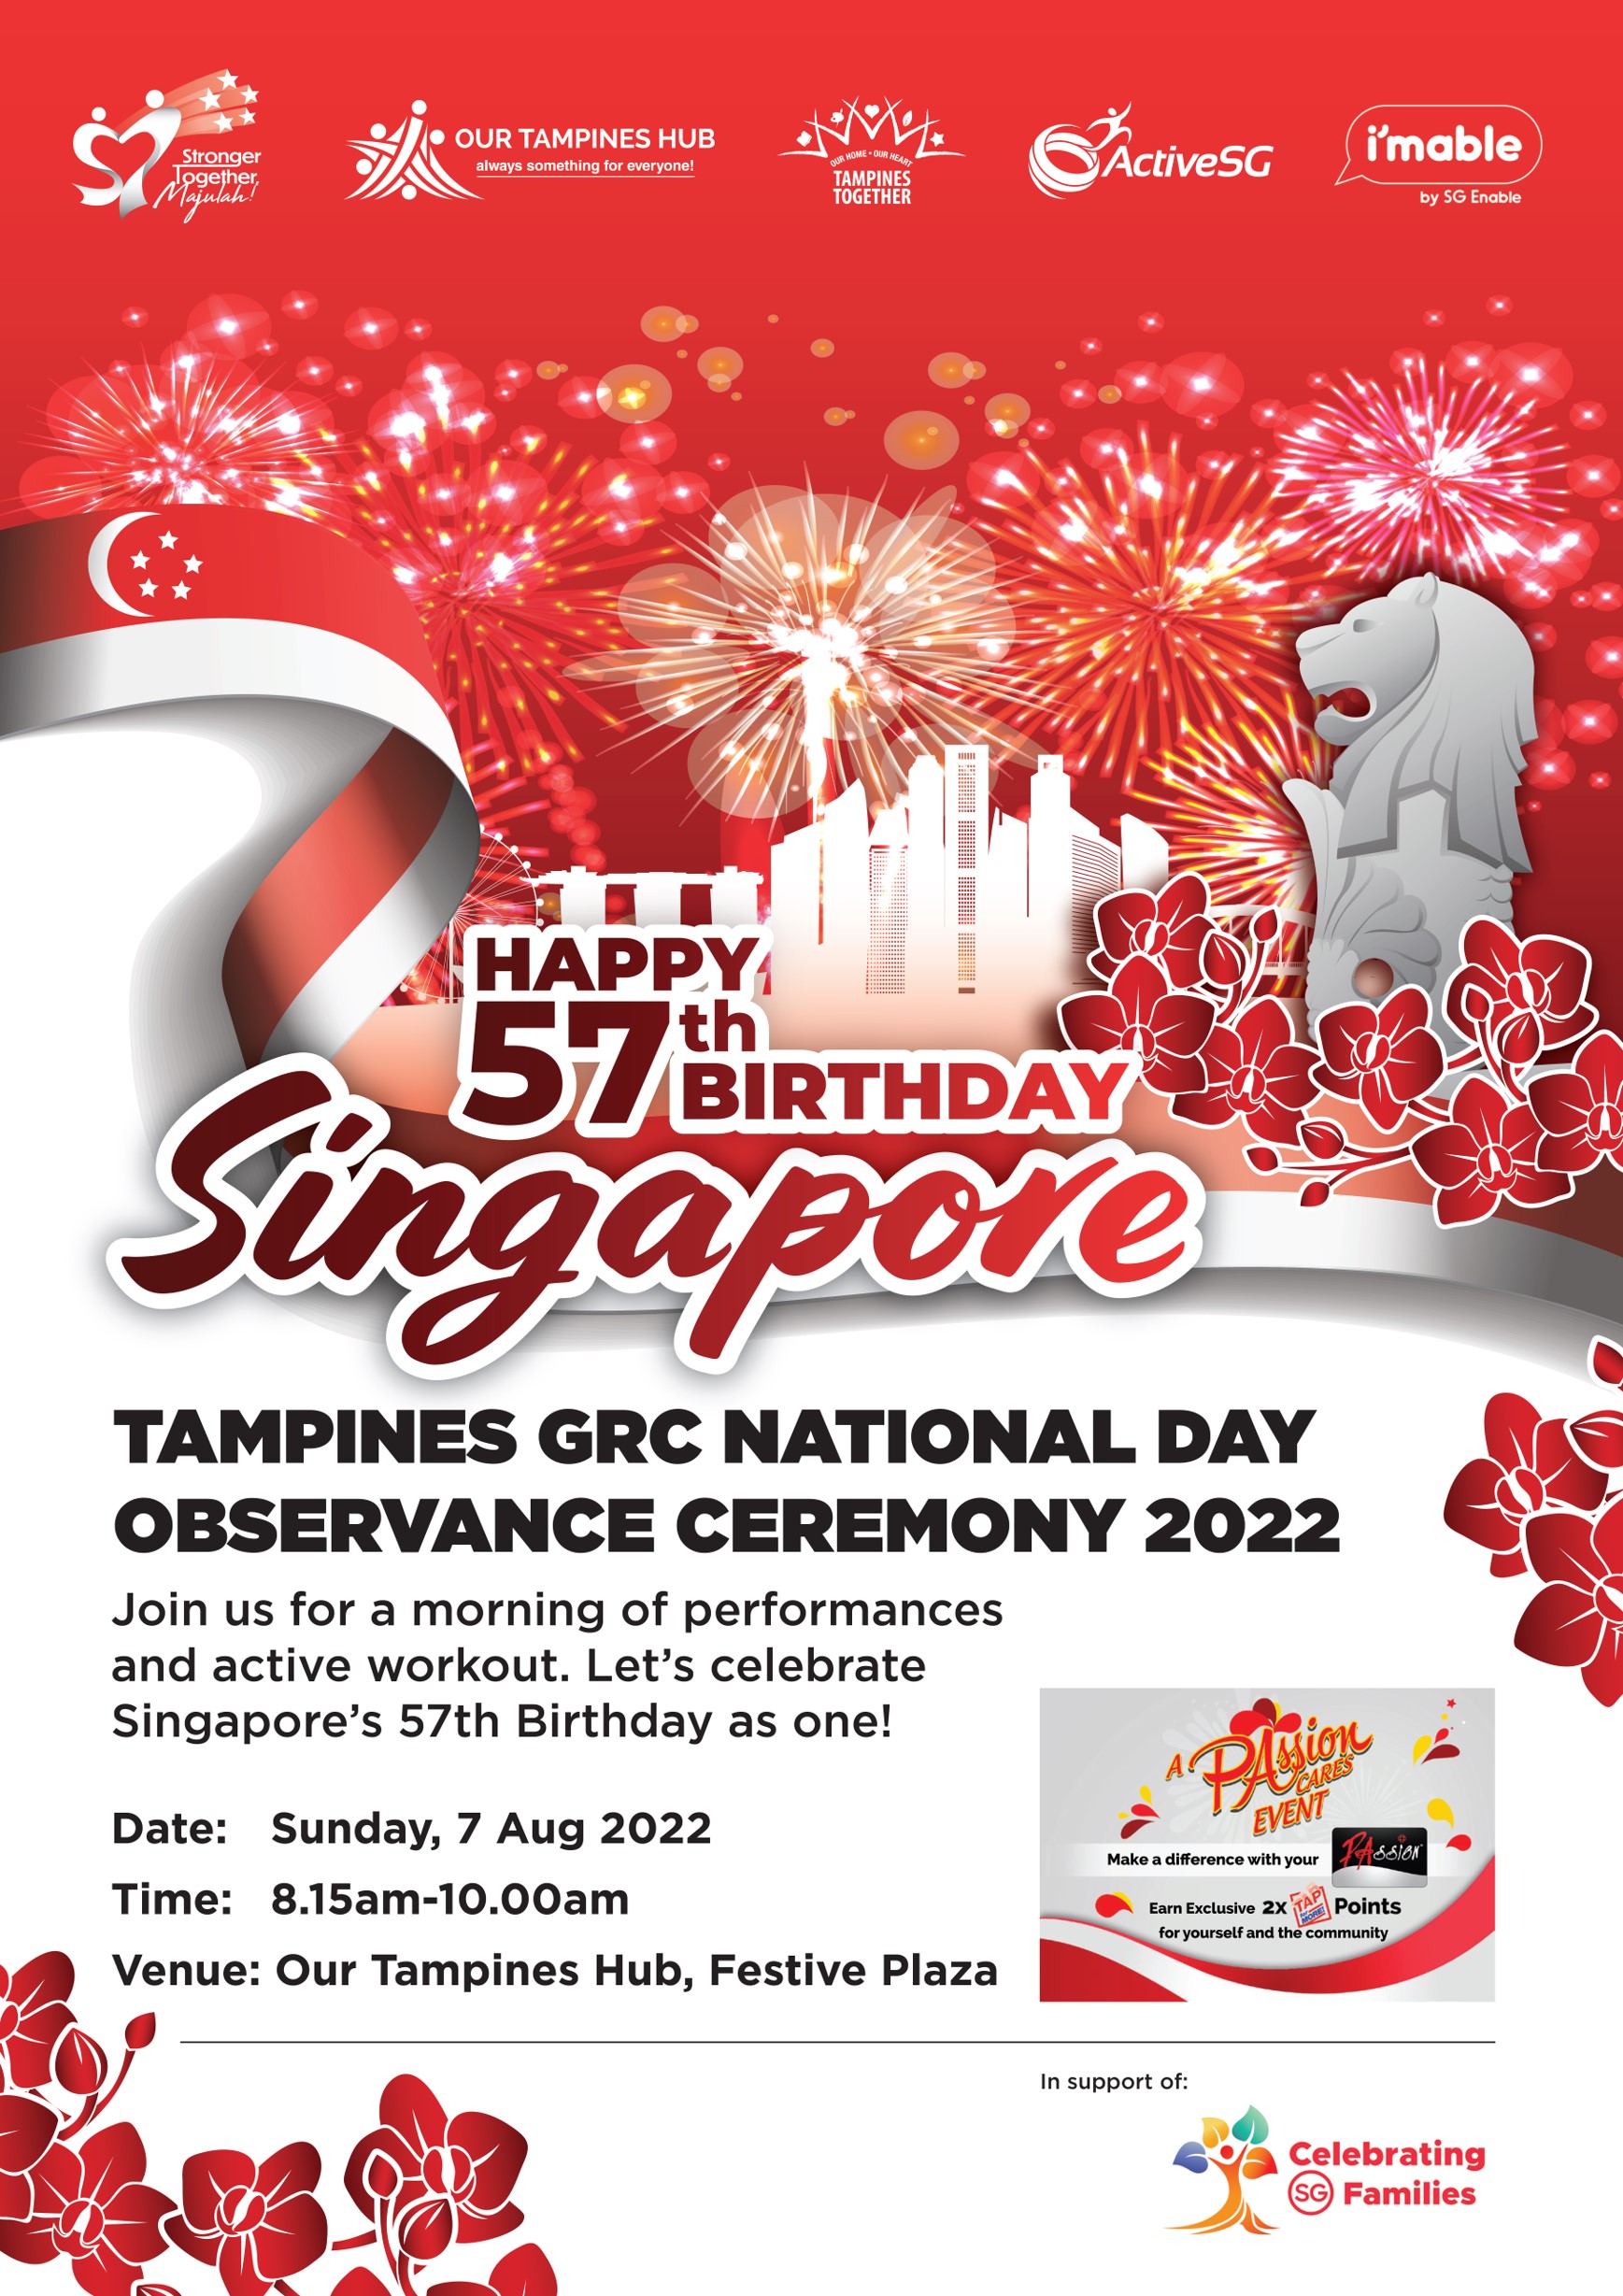  Tampines GRC National Day Observance Ceremony 2022